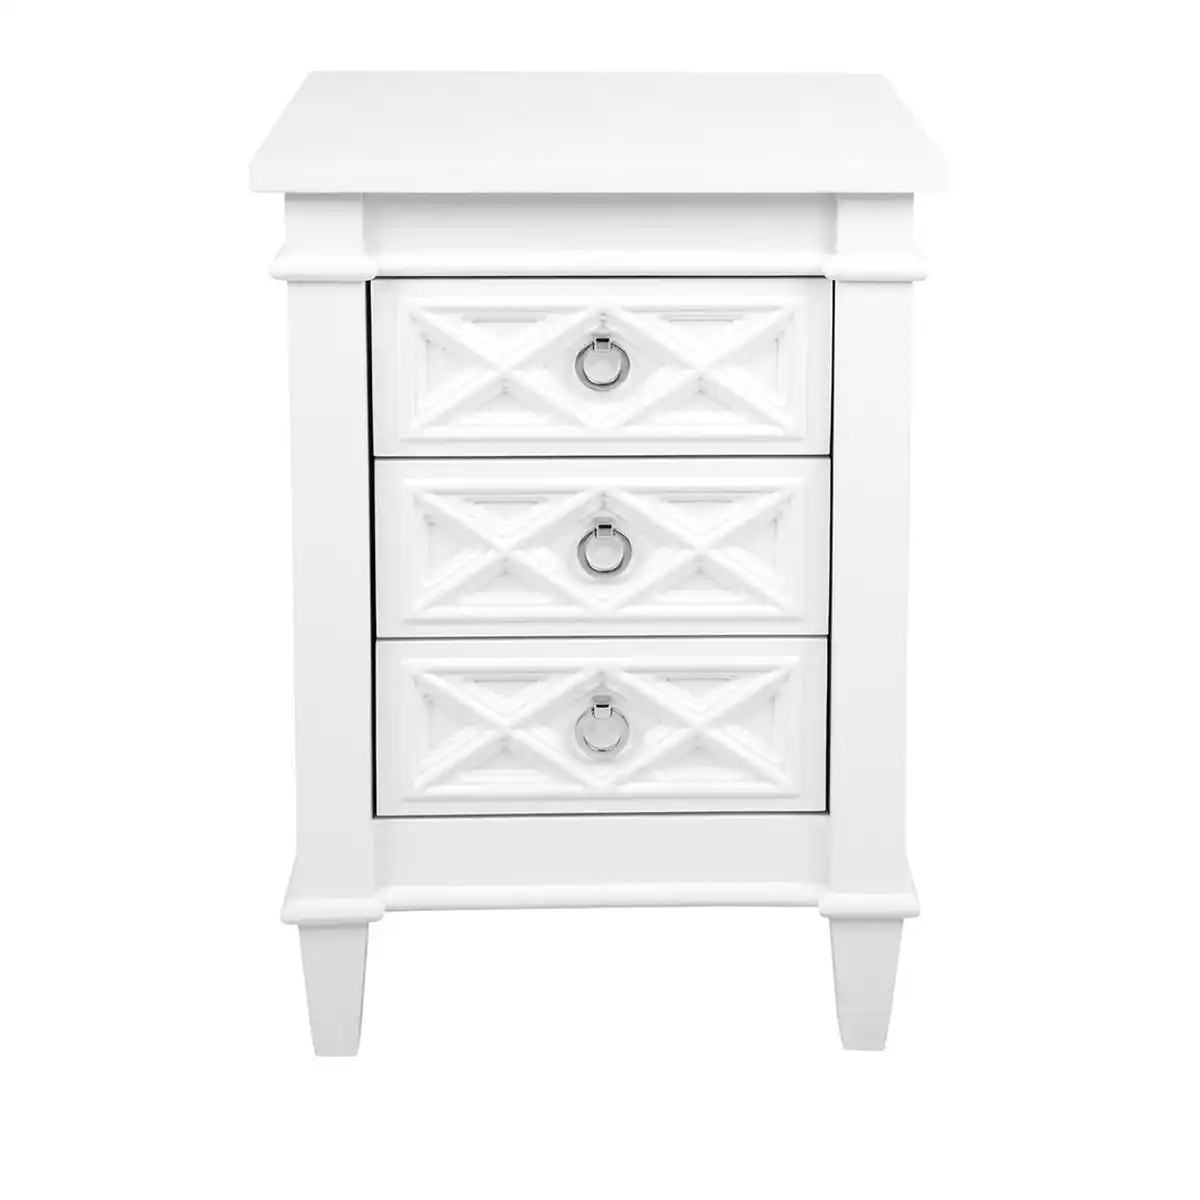 Plantation Bedside Table -  Small White